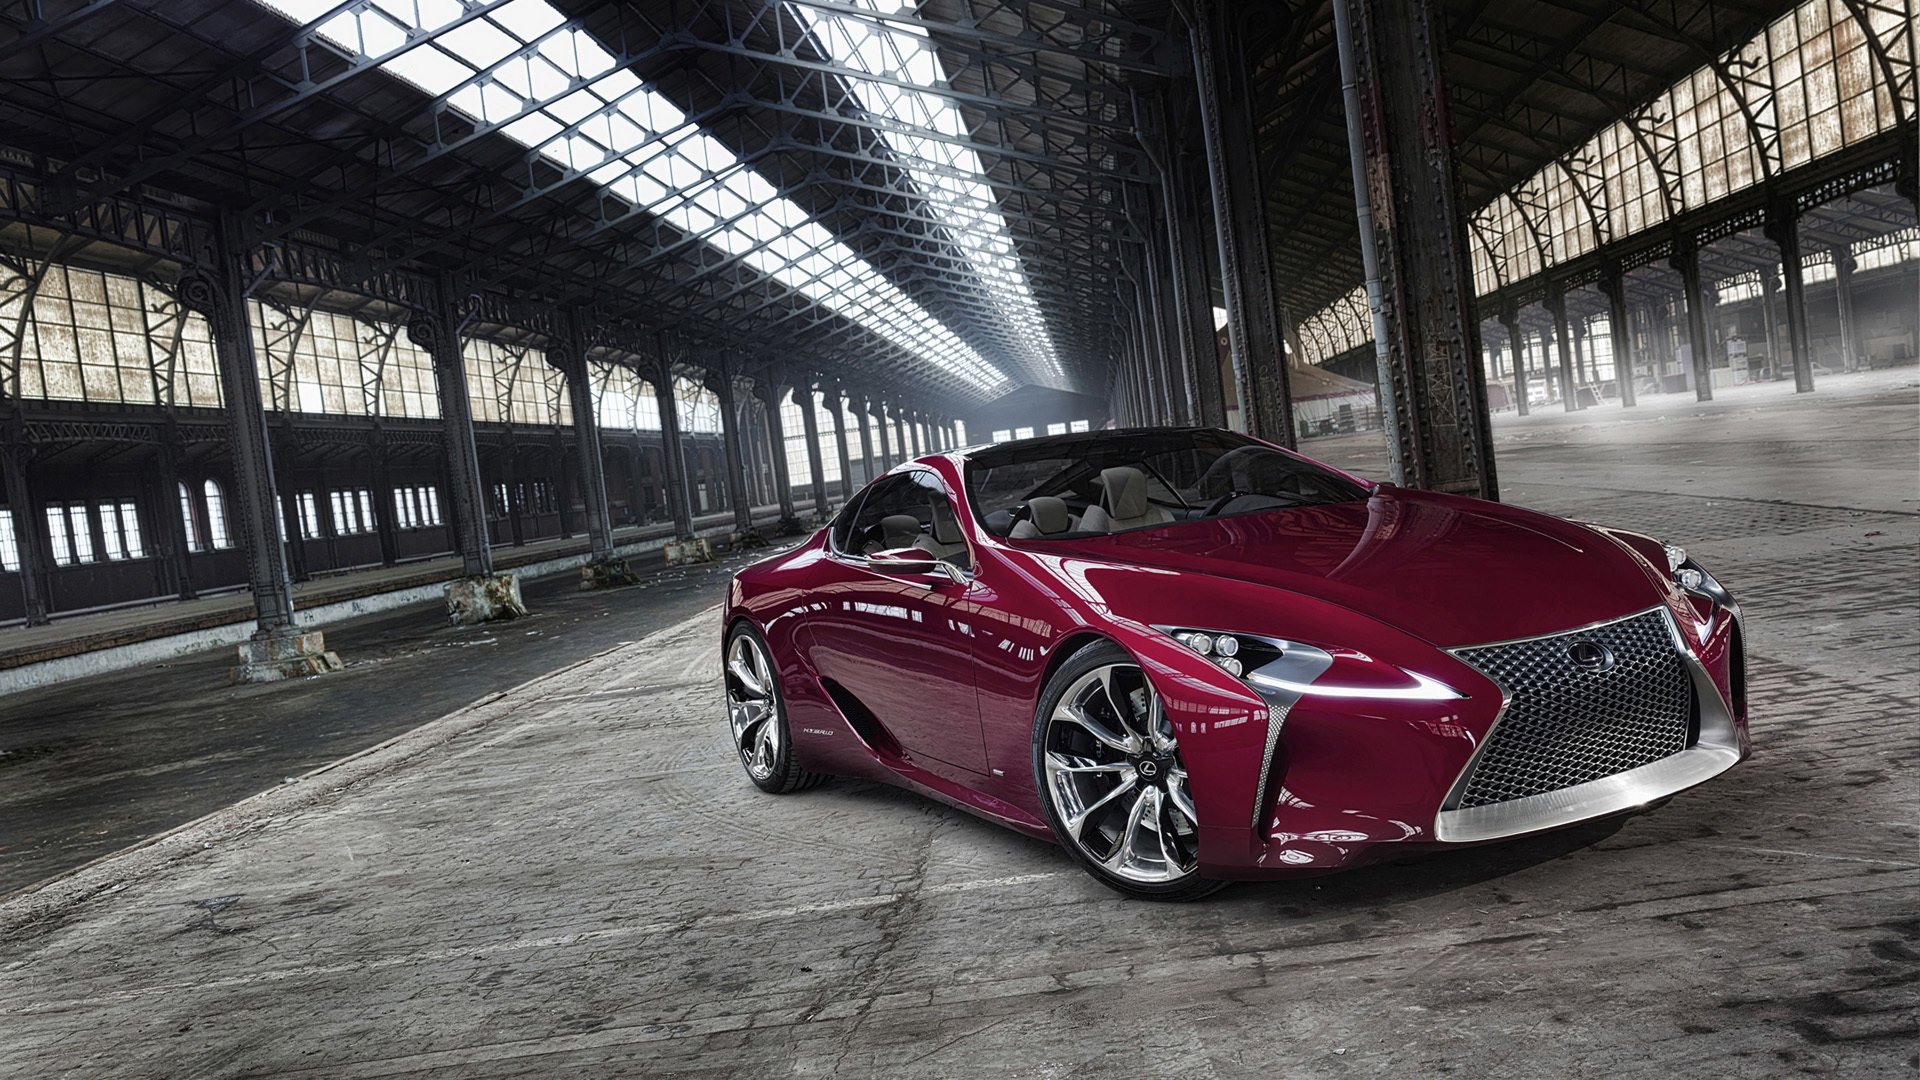 Lexus LF-LC 4k Ultra HD Wallpaper and Background Image | 3840x2160 | ID